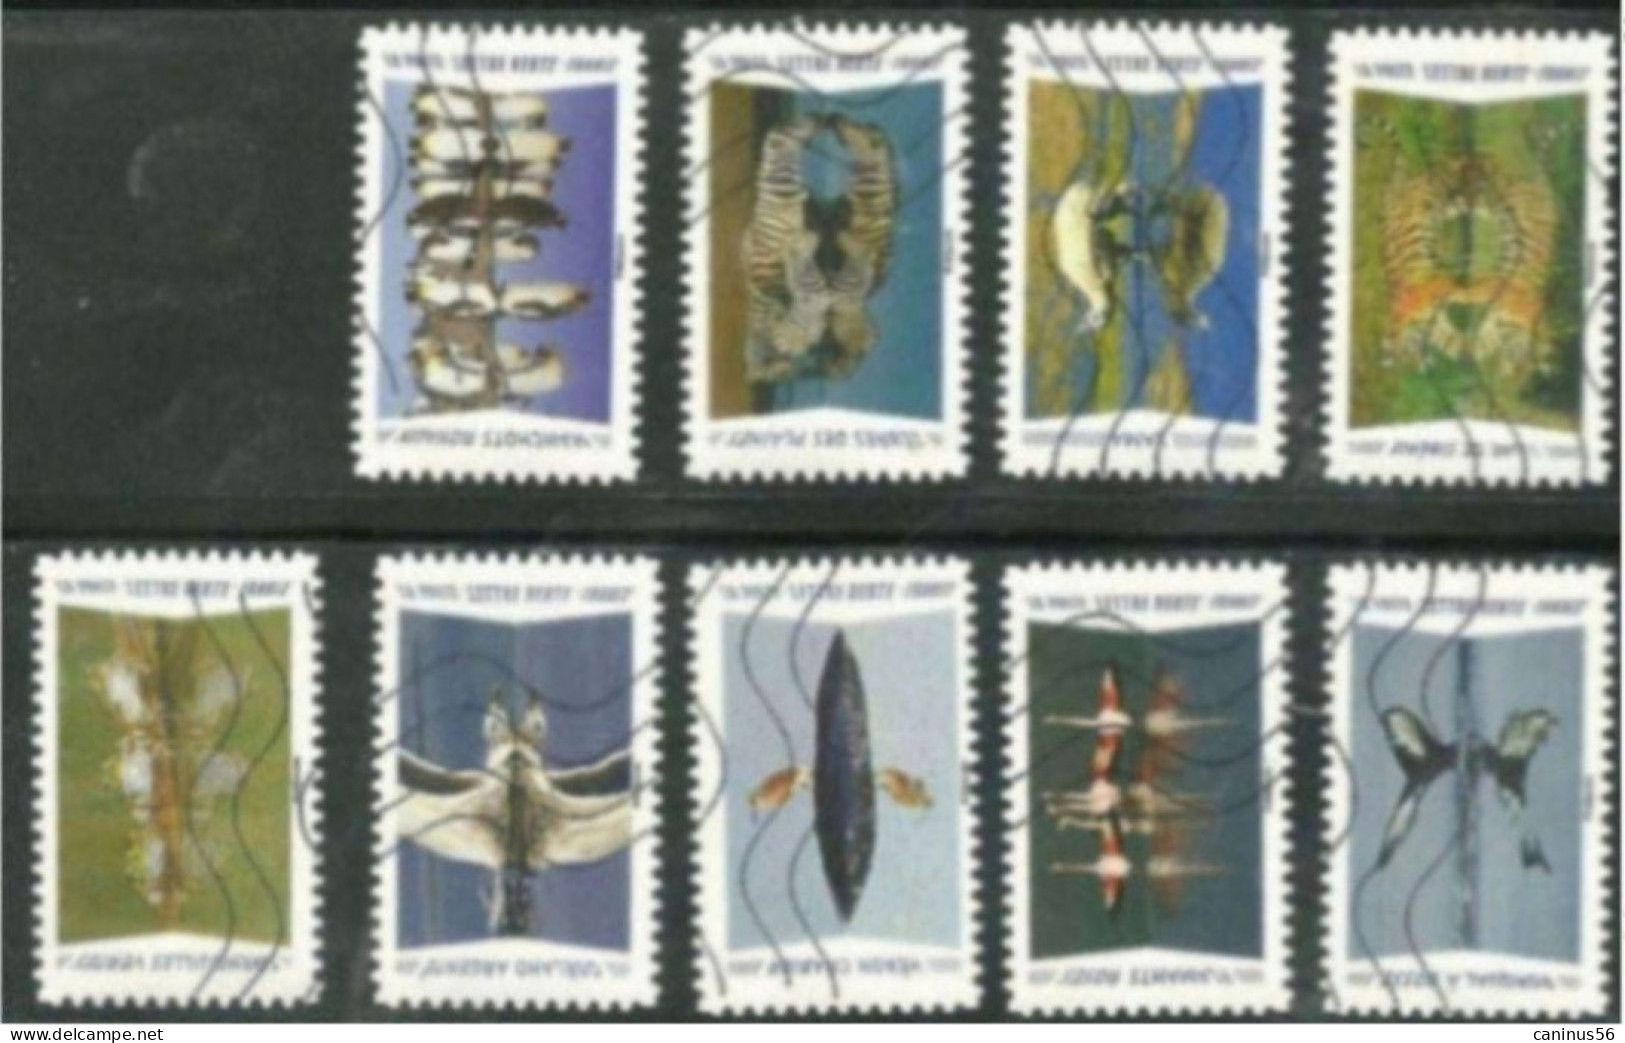 2020 Yt AA 1815 1816 1820 1821 1922 1823 1824 1825 1826 (o) Animaux Du Monde Reflets 9 Visuels - Used Stamps